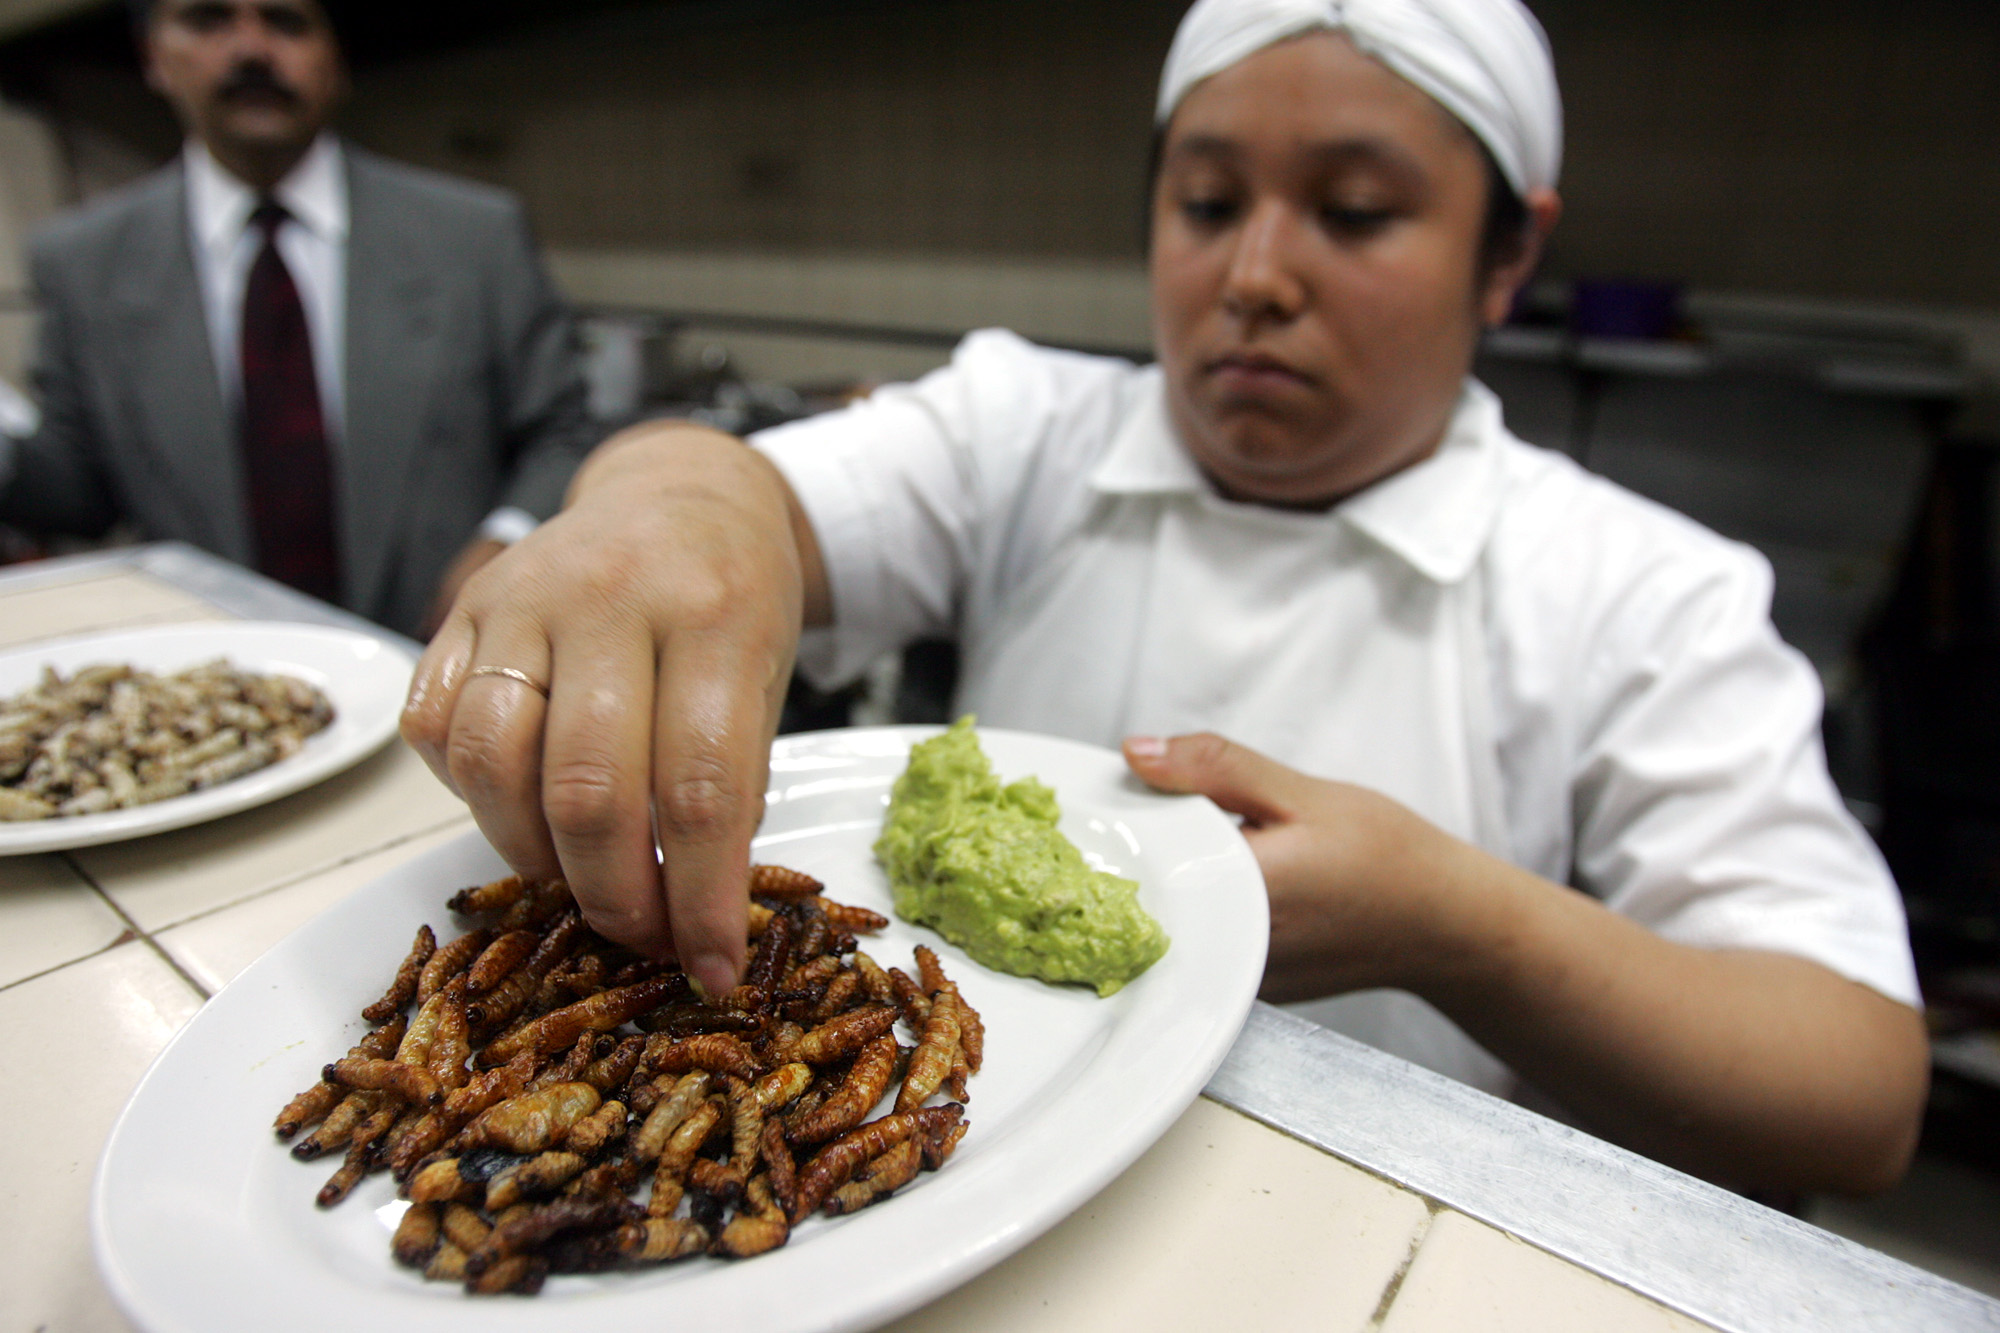 A cook serves deep-fried worms with A cook serves deep-fried worms with guacamole at the Hosteria Santo Domingo in Mexico City, Mexico.guacamole at the Hosteria Santo Domingo in Mexico City, Mexico